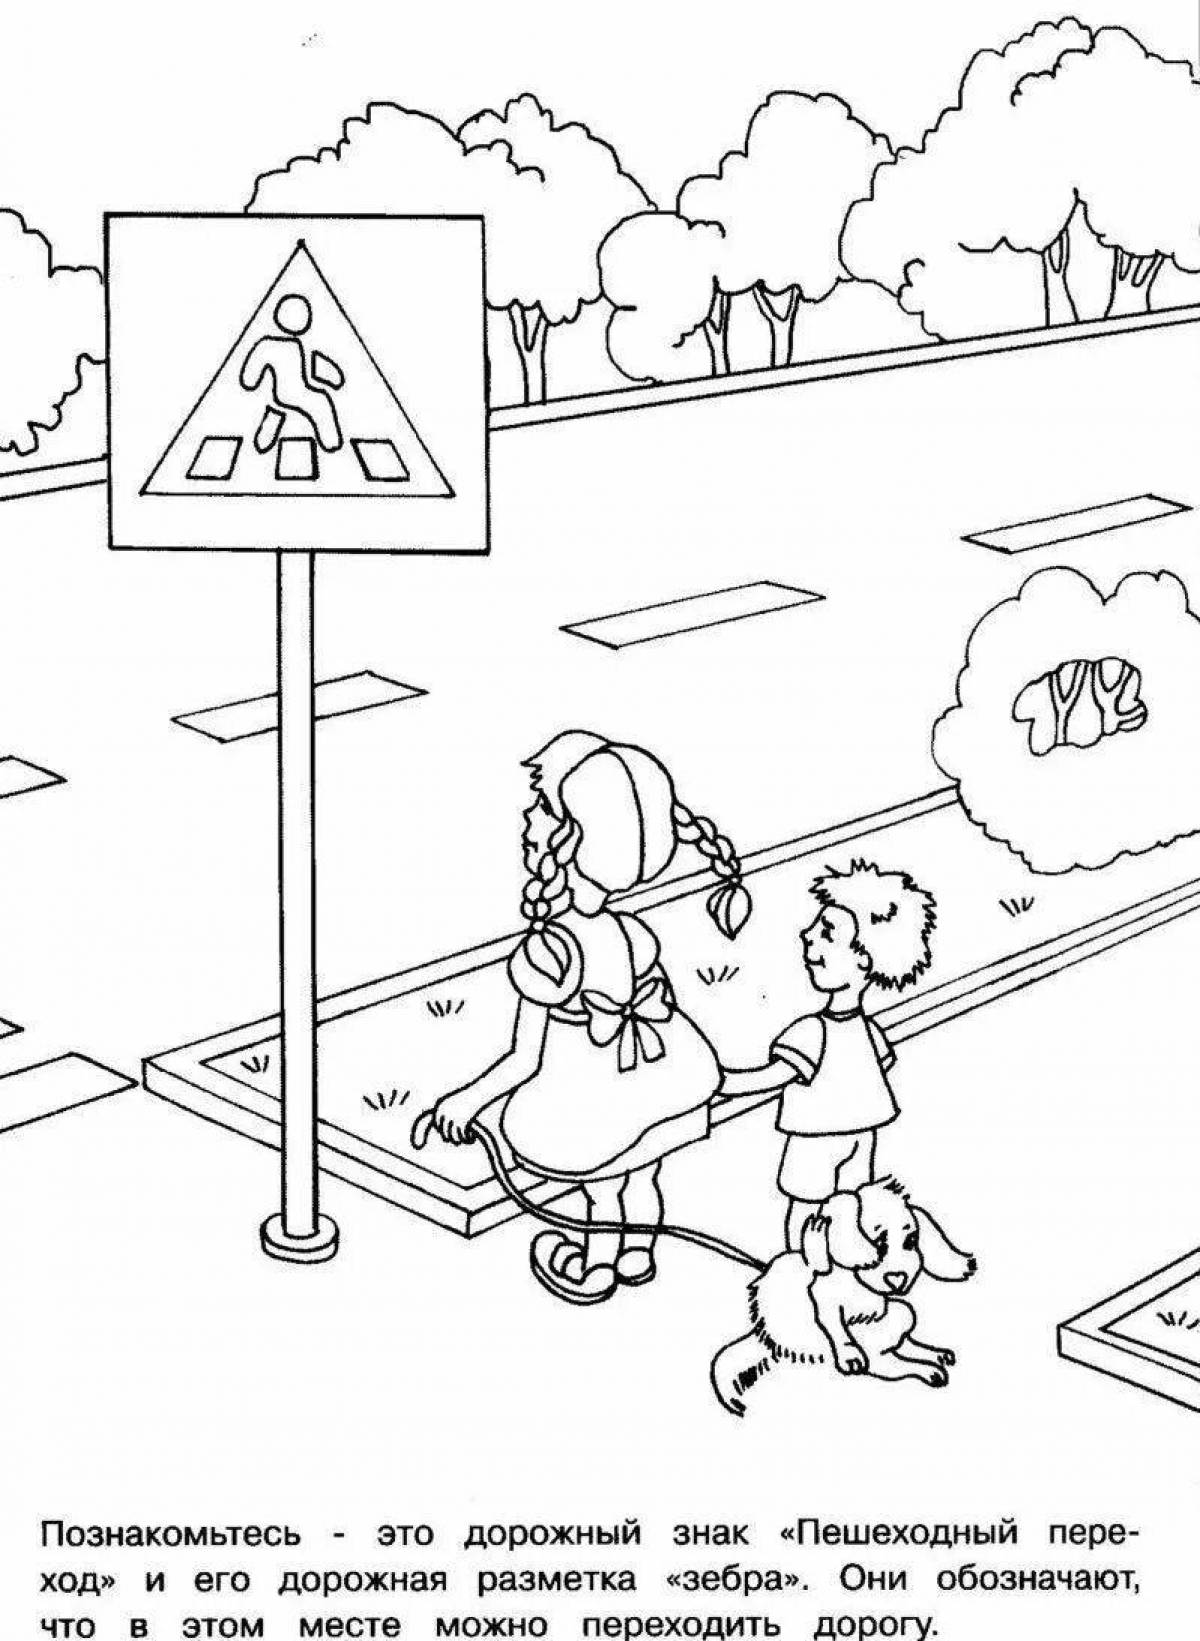 Drawings for kids traffic rules for kids #17